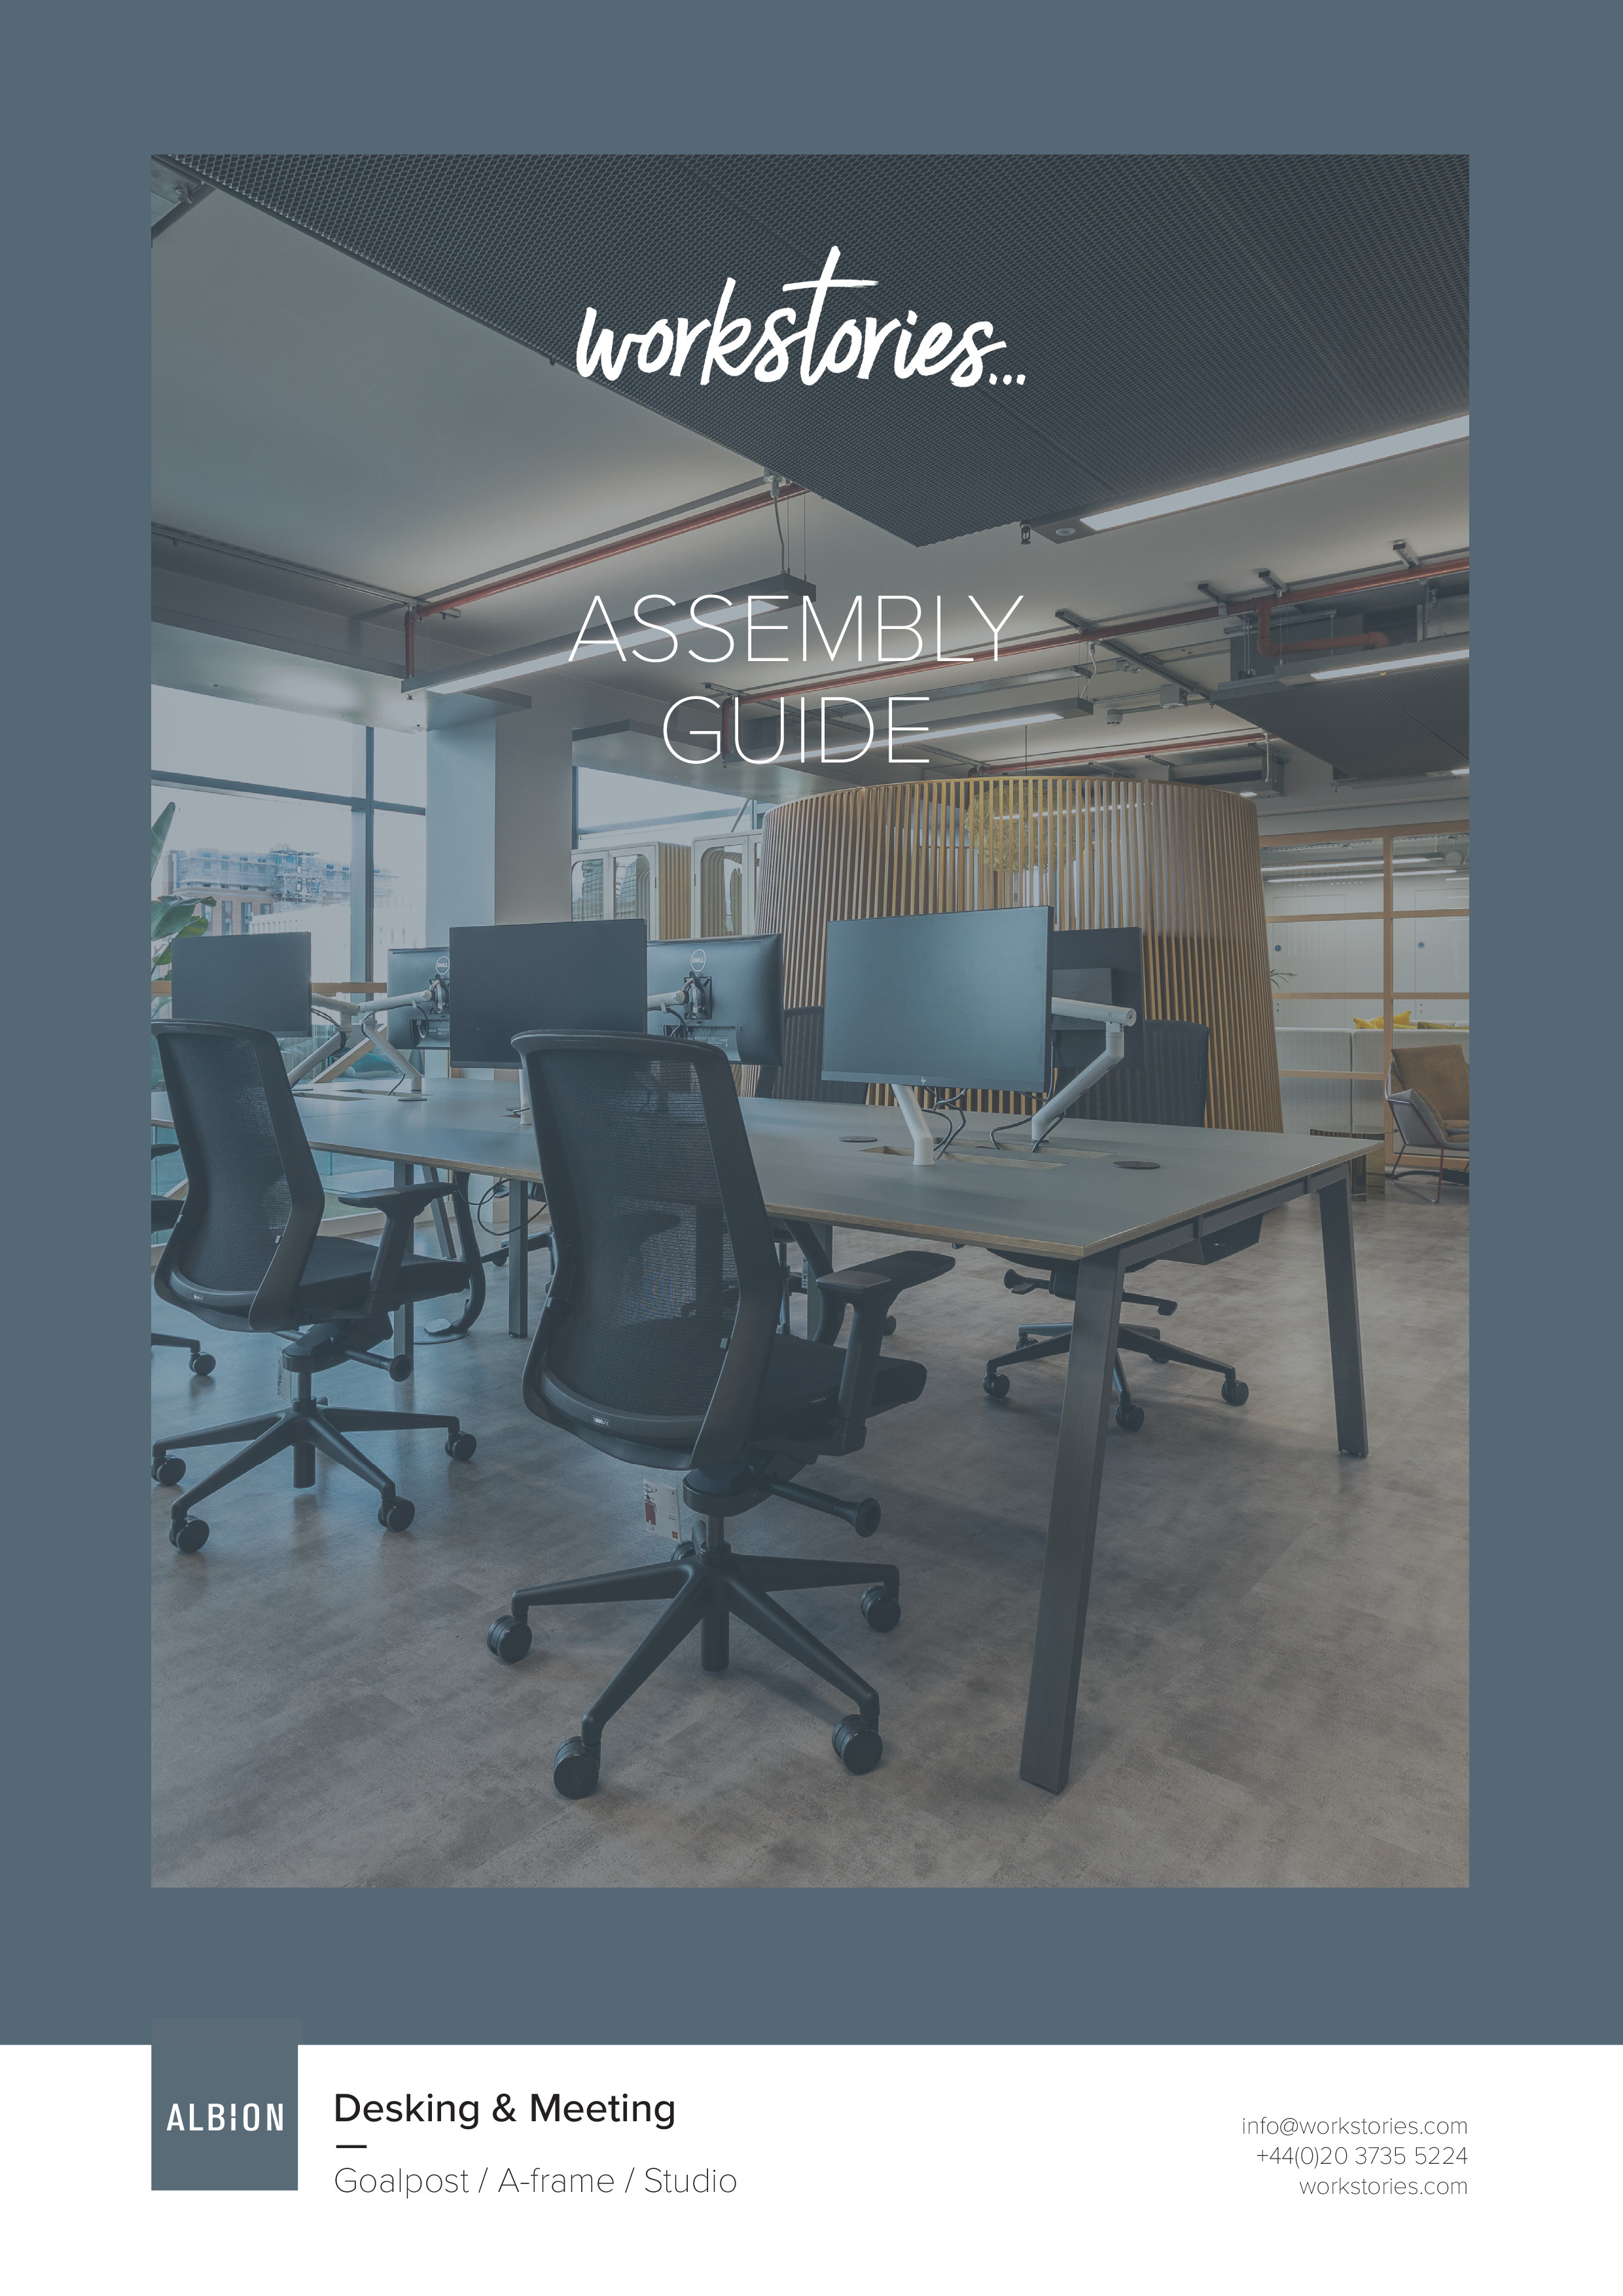 WS - ASSEMBLY GUIDE - Meeting - Goalpost, A-frame, Studio